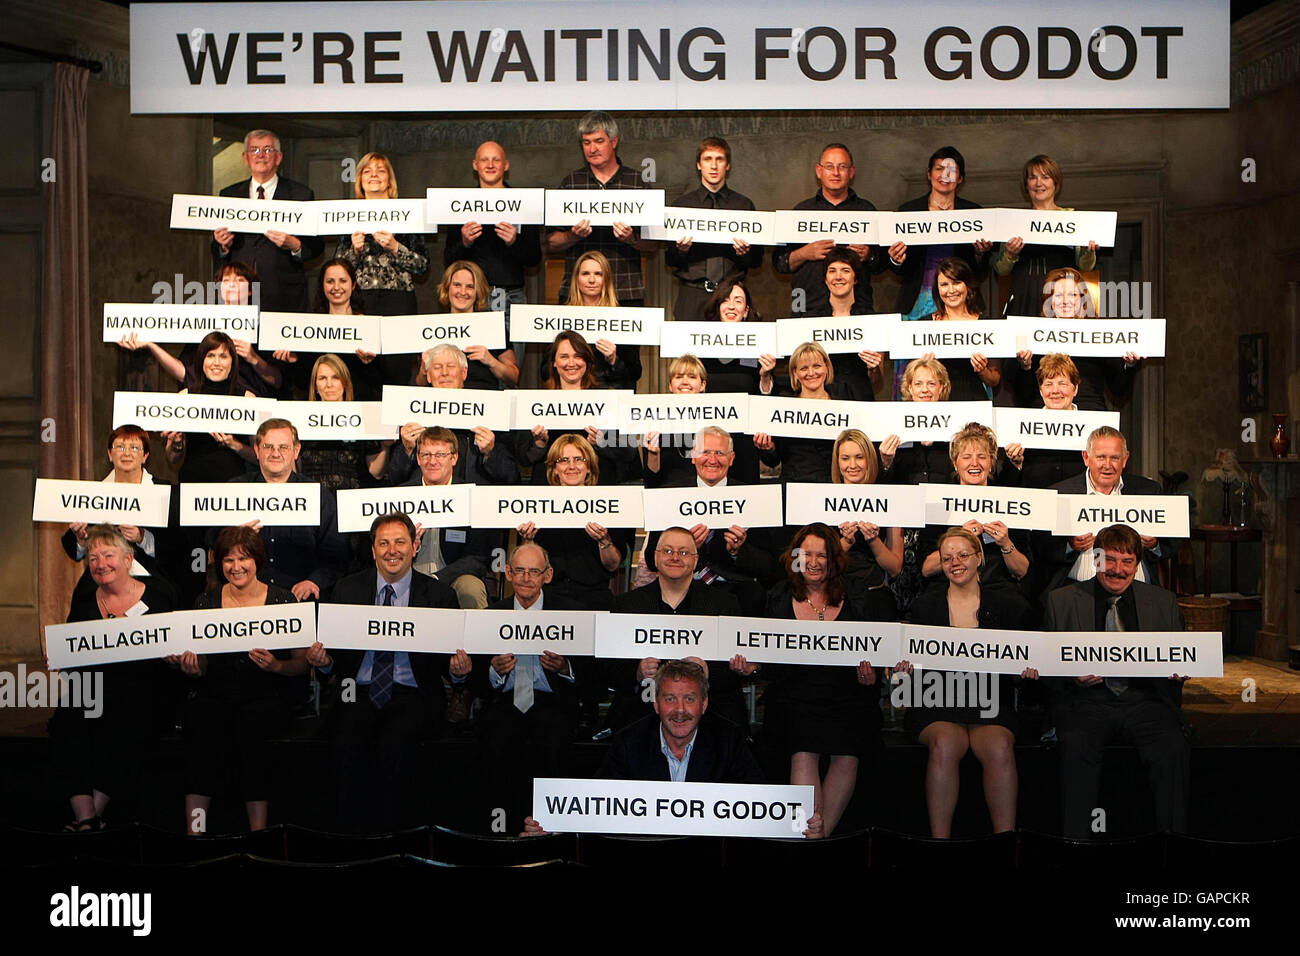 Representatives from 40 venues across Ireland, from all 32 Irish counties come together onstage at the Gate Theatre, Dublin, to launch 'Waiting for Godot' by Samuel Beckett - one night only national tour. Stock Photo